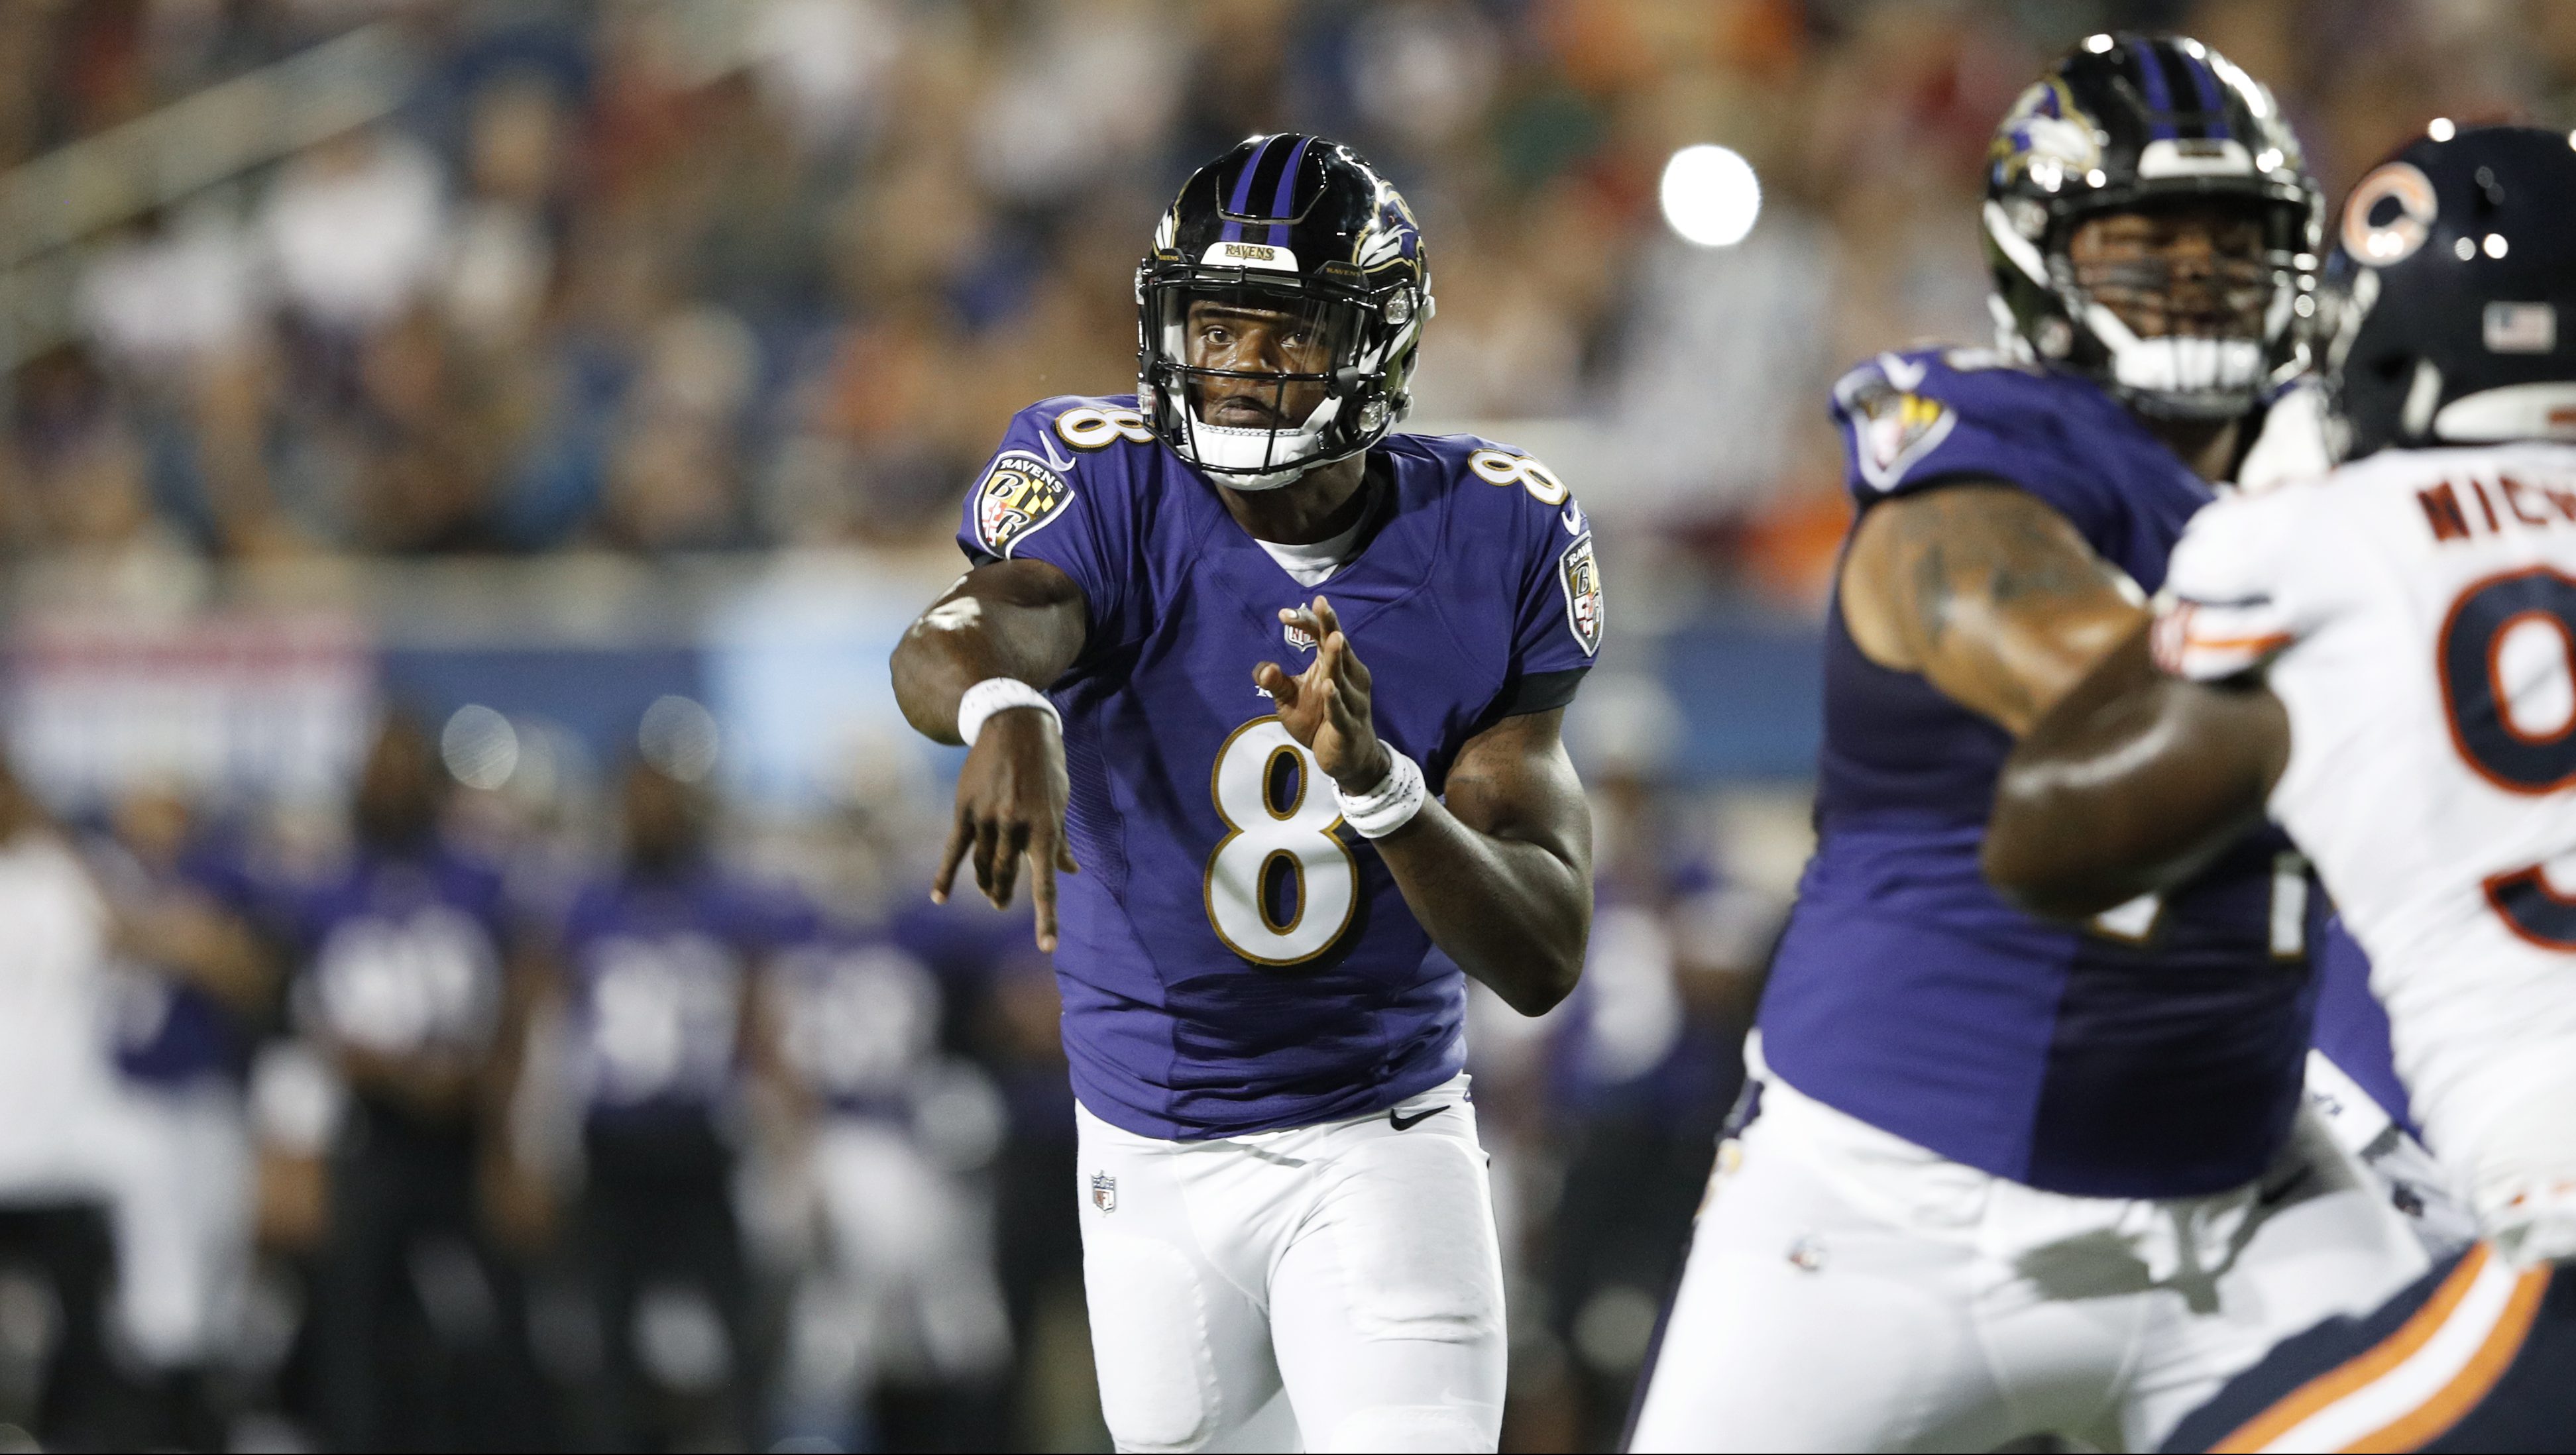 Lamar Jackson: Highlights & Stats From NFL Debut